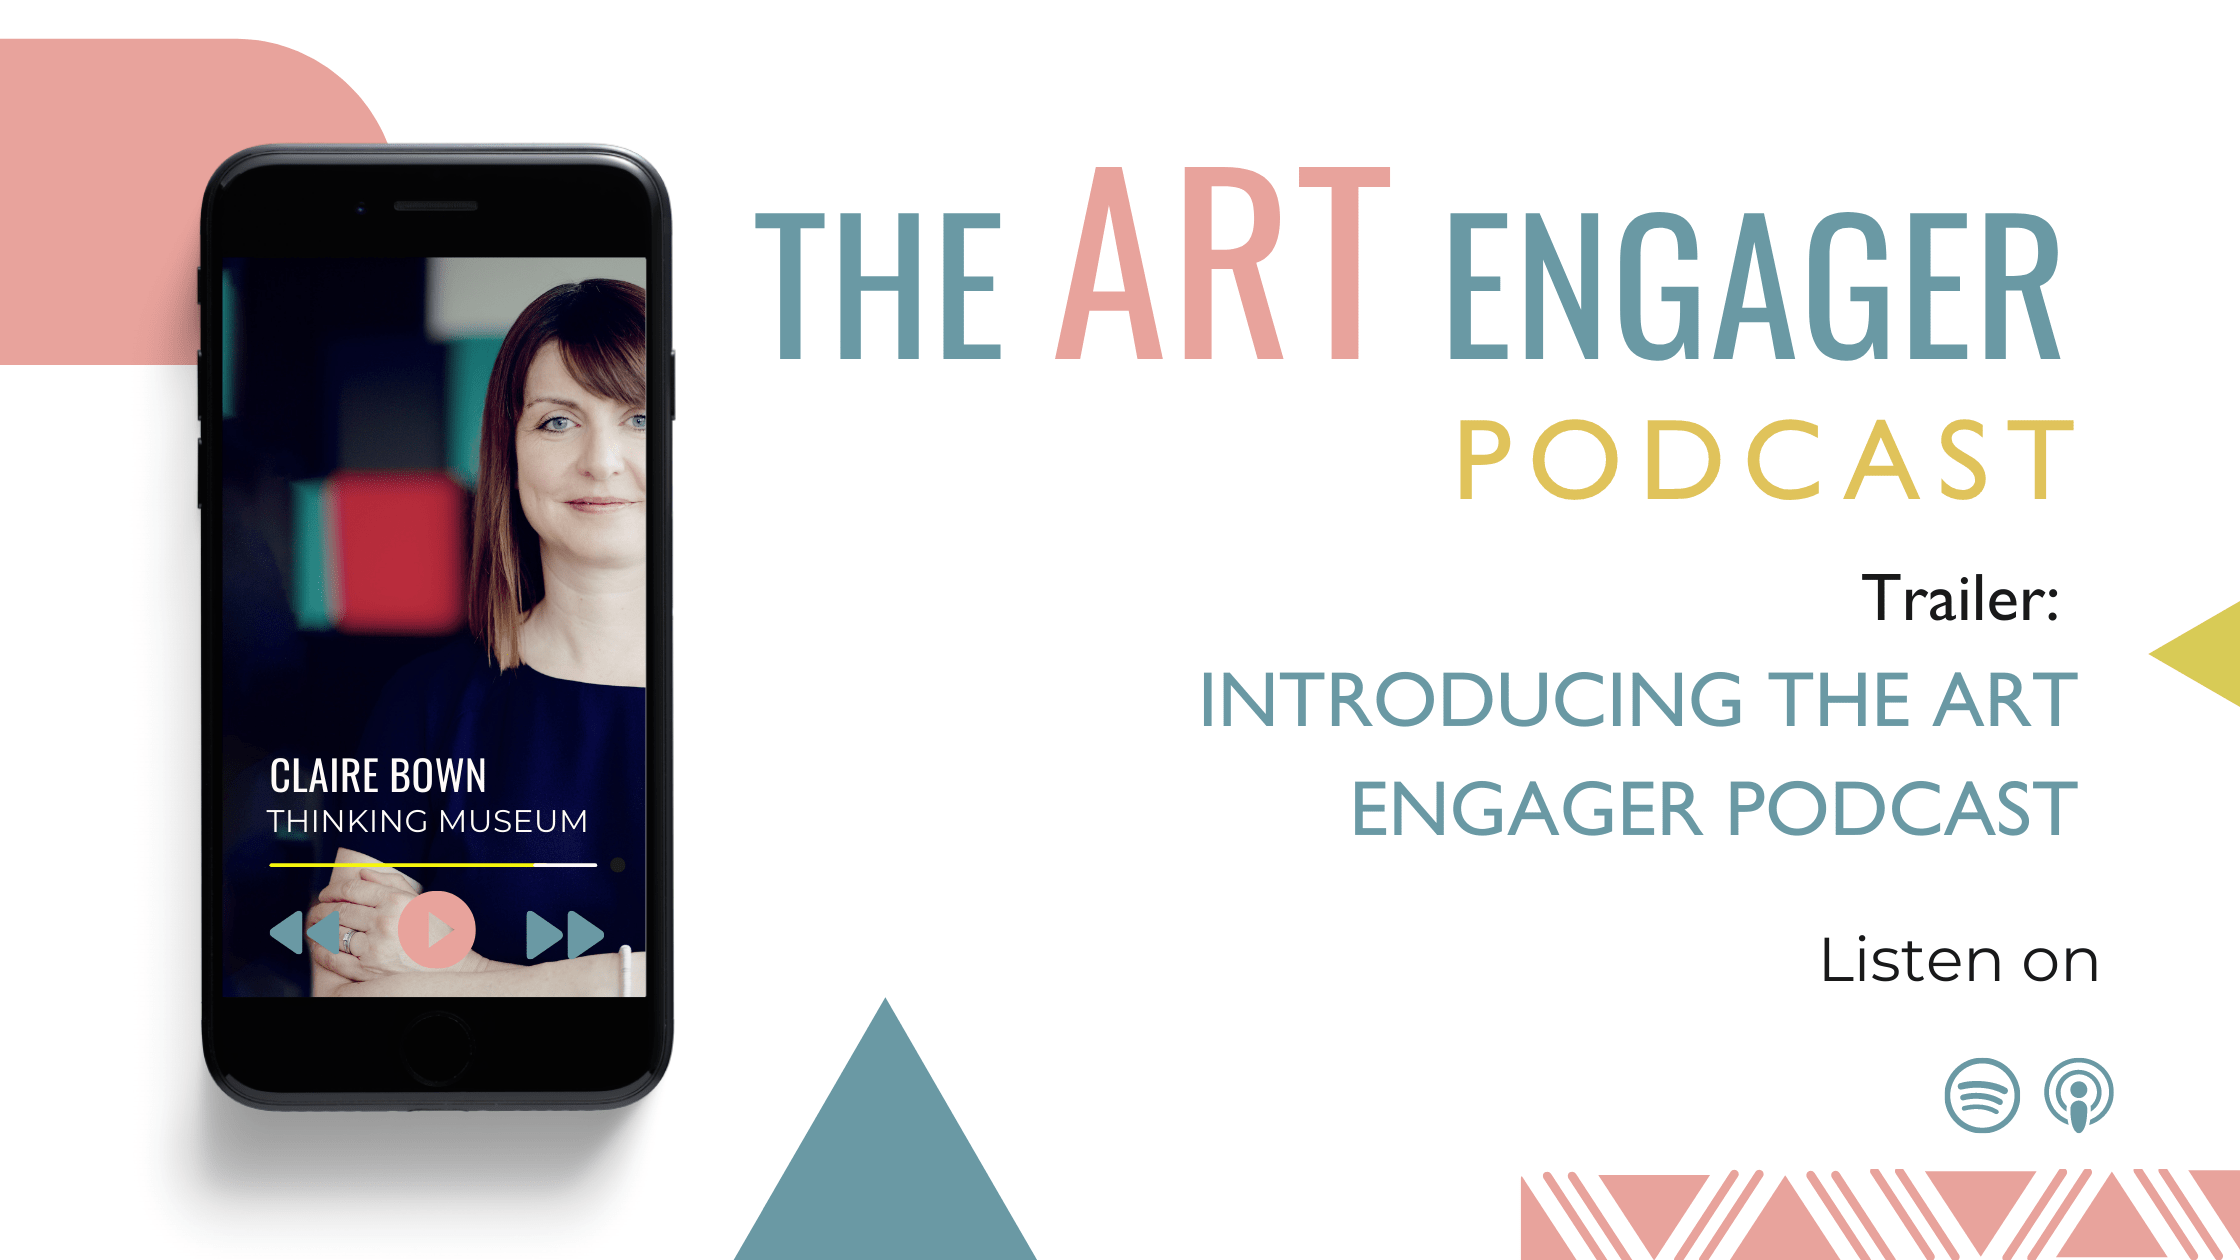 Introducing the Art Engager Podcast